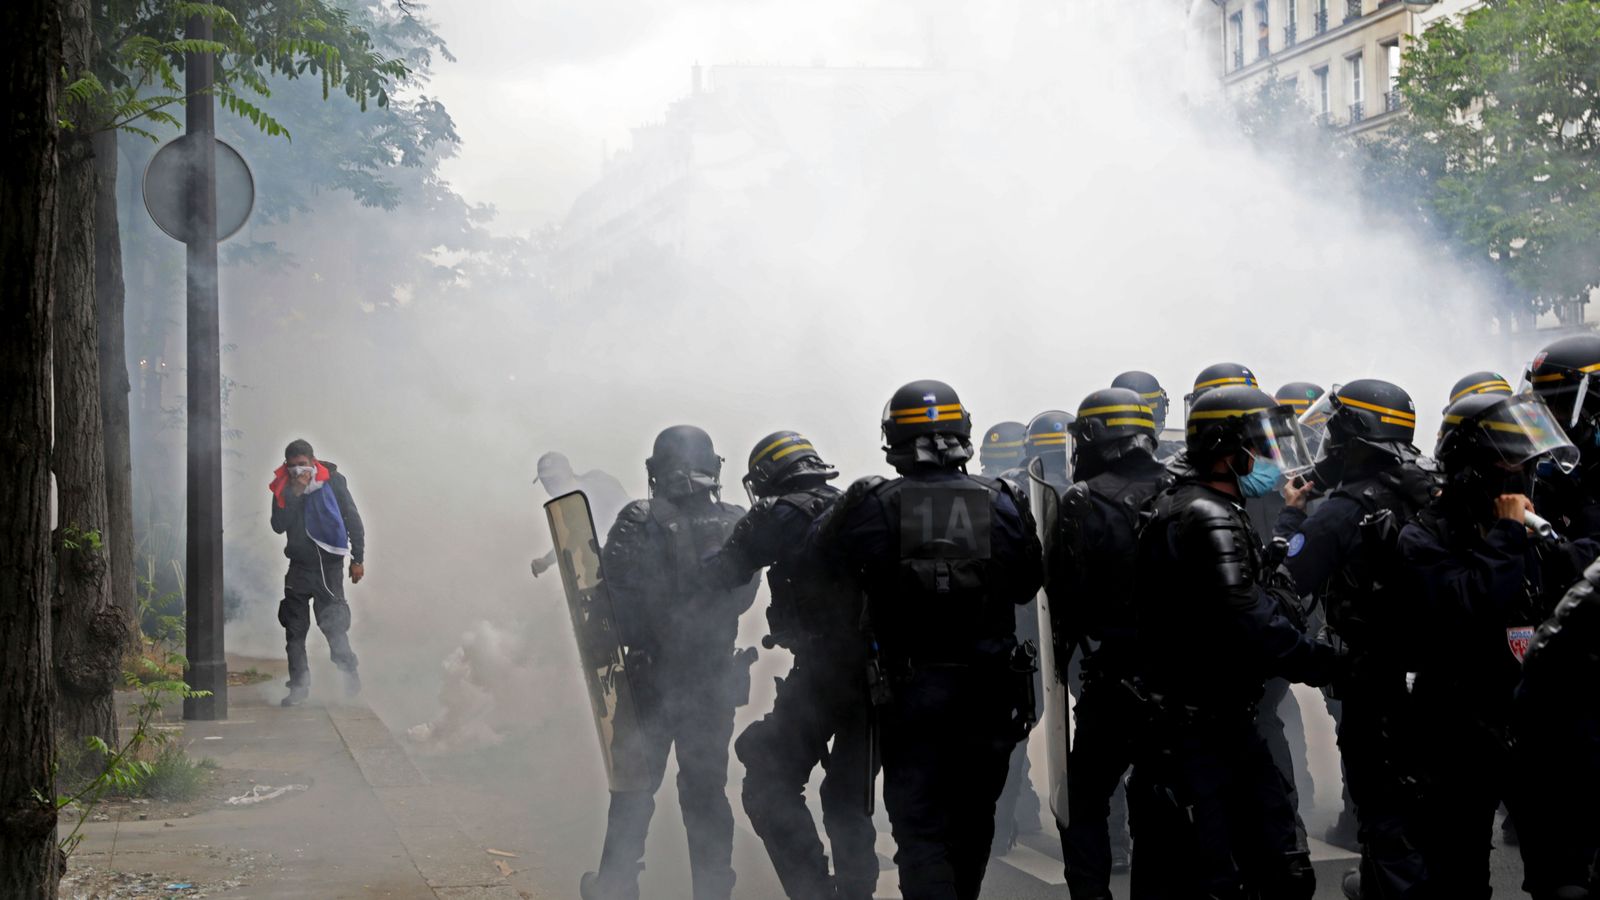 COVID-19: Tear gas fired amid clashes at coronavirus vaccine passport protests in Paris